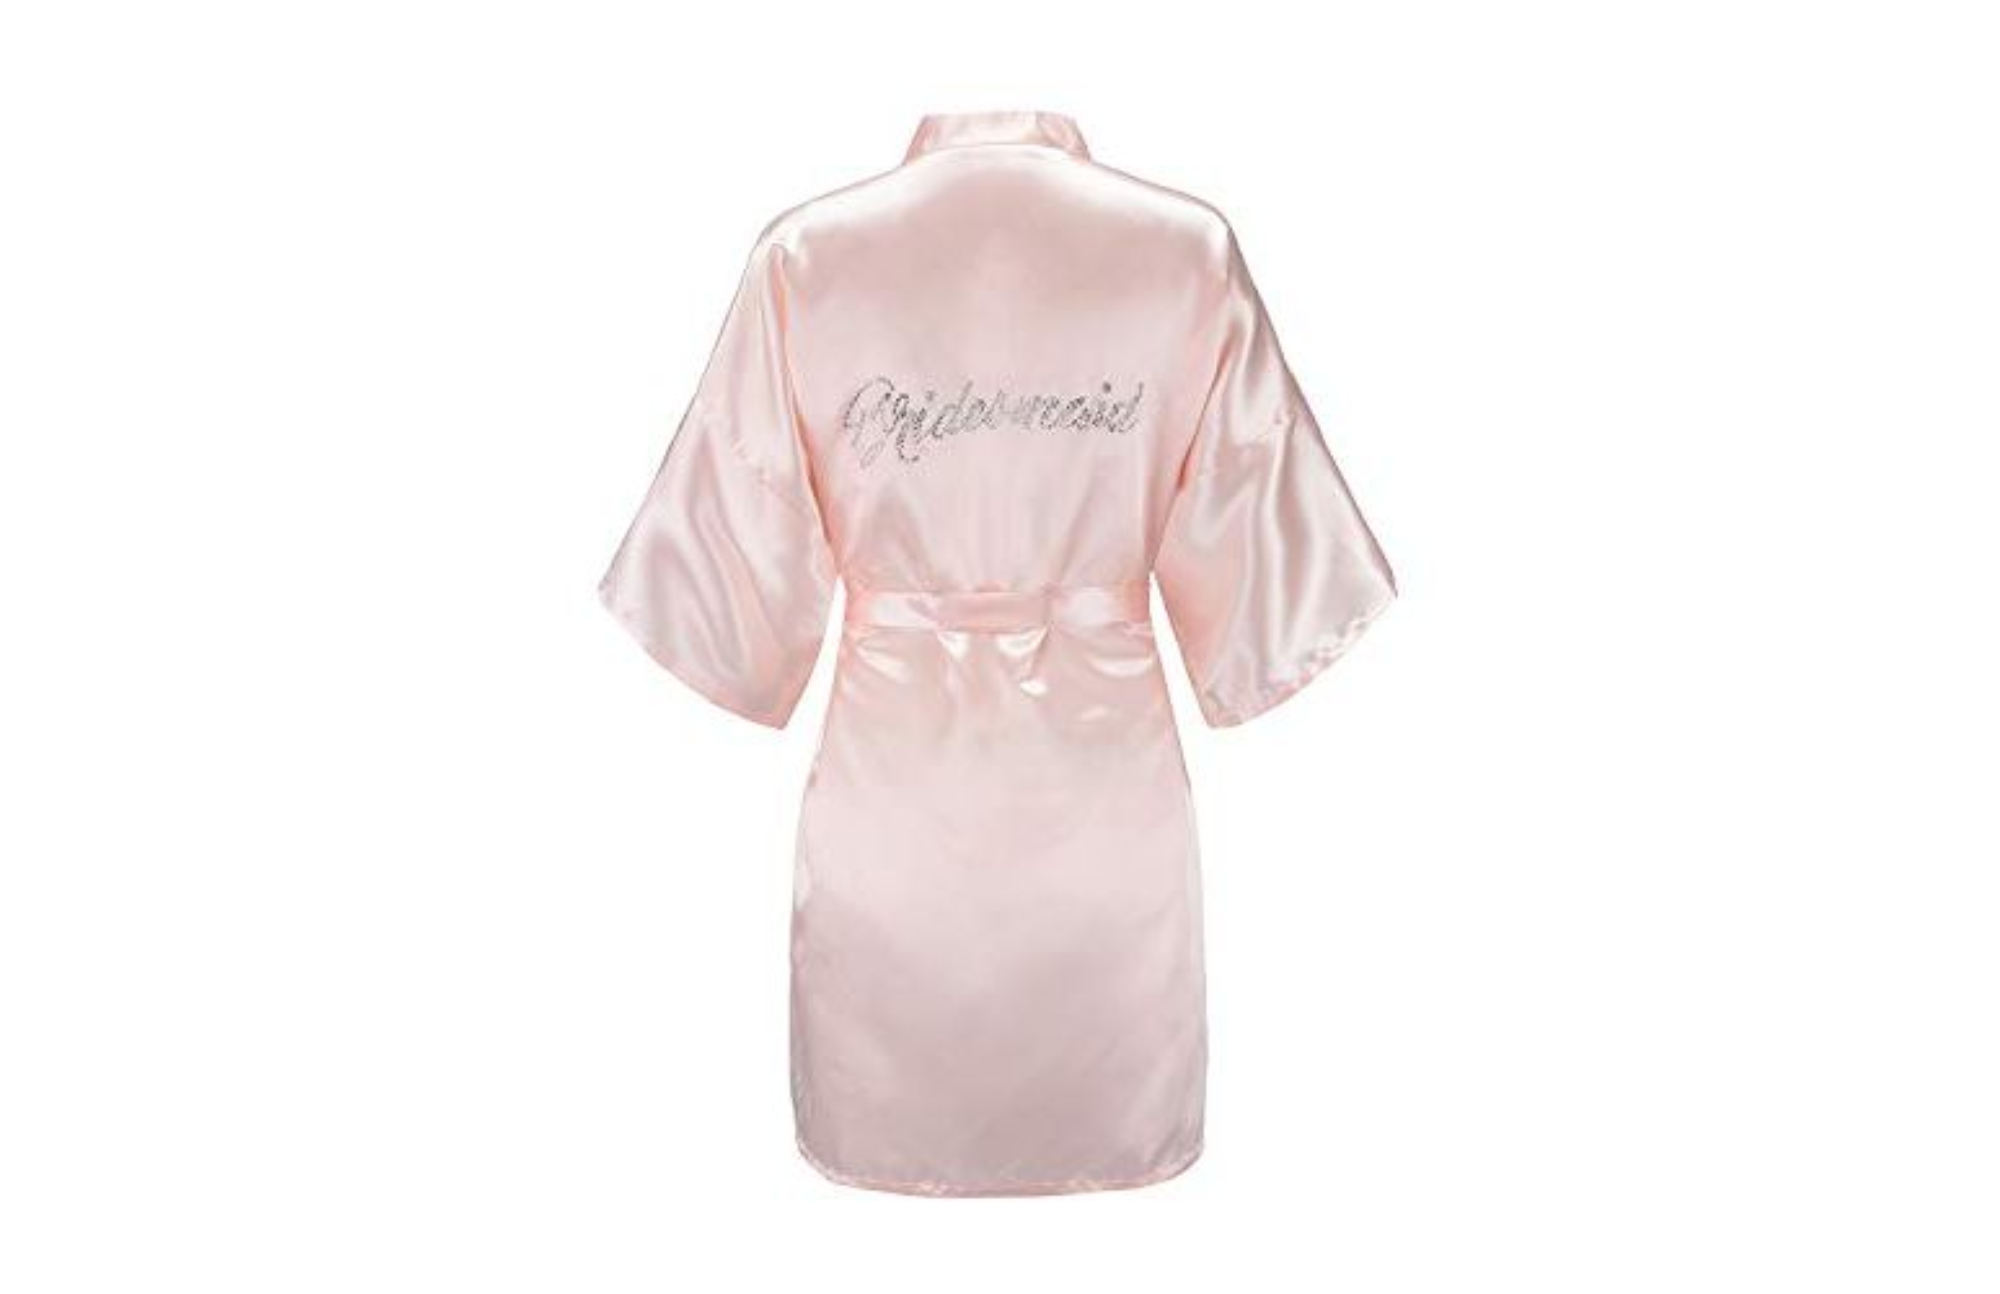 The word "bridesmaid" is written on the back of a pink bridesmaid robe